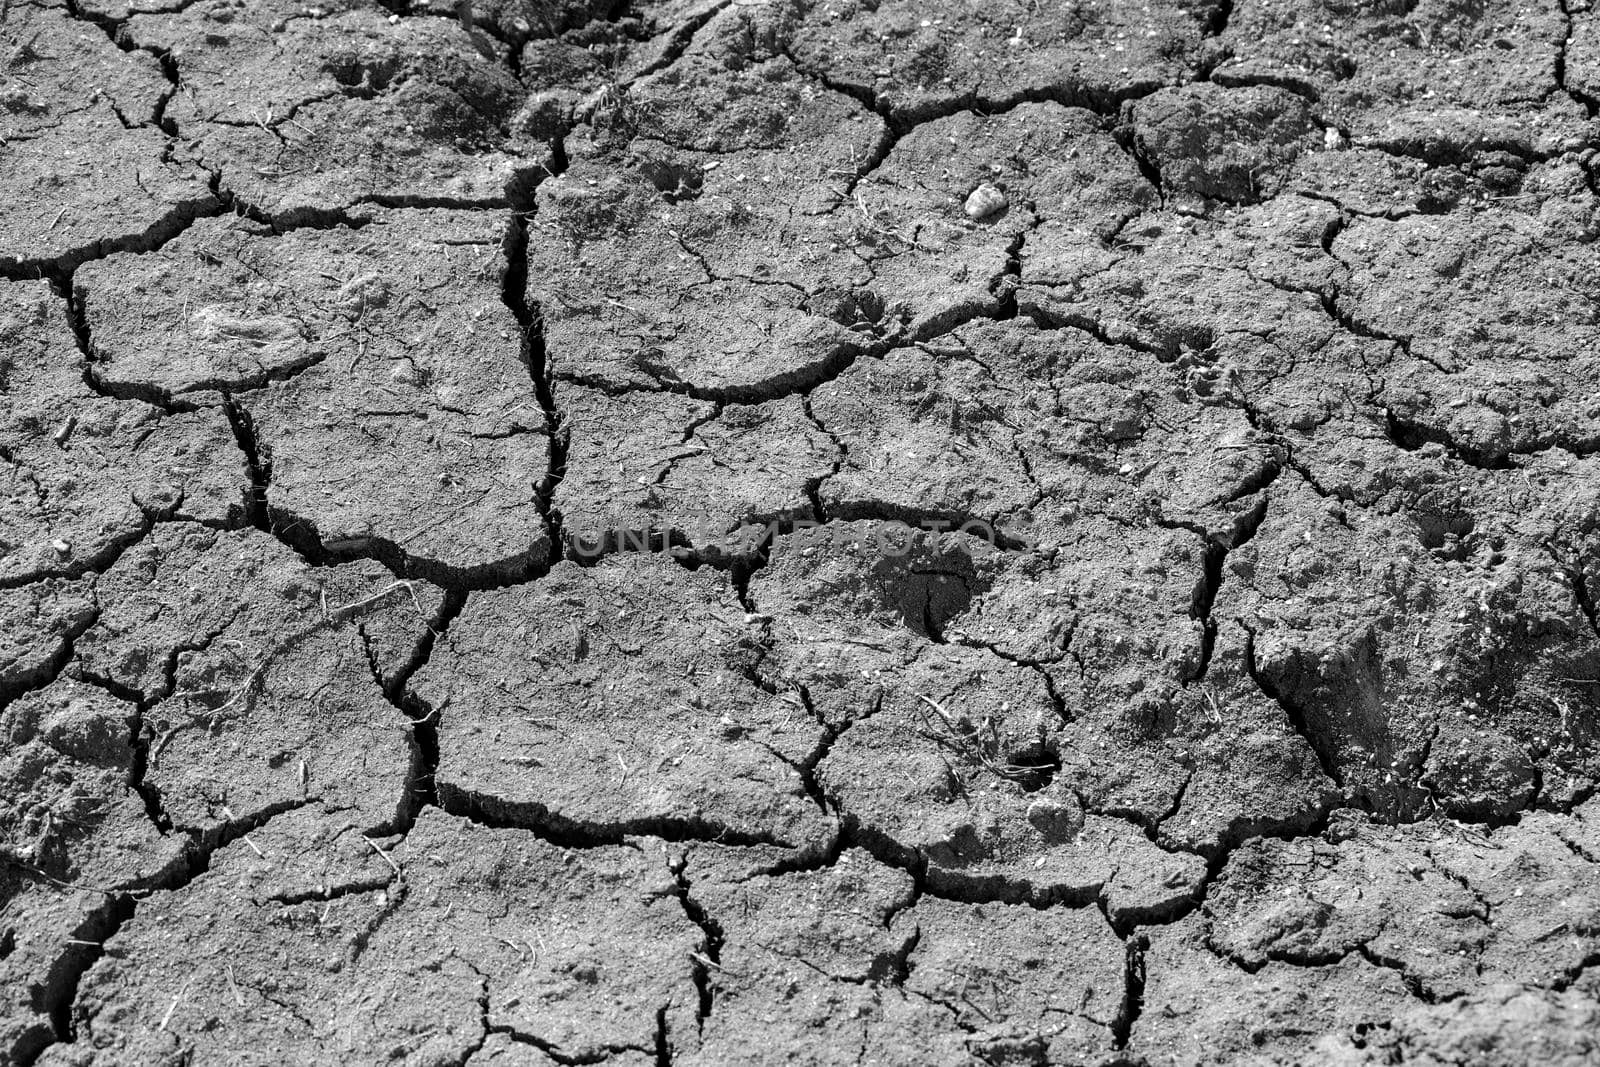 Texture of a cracked surface of a soil